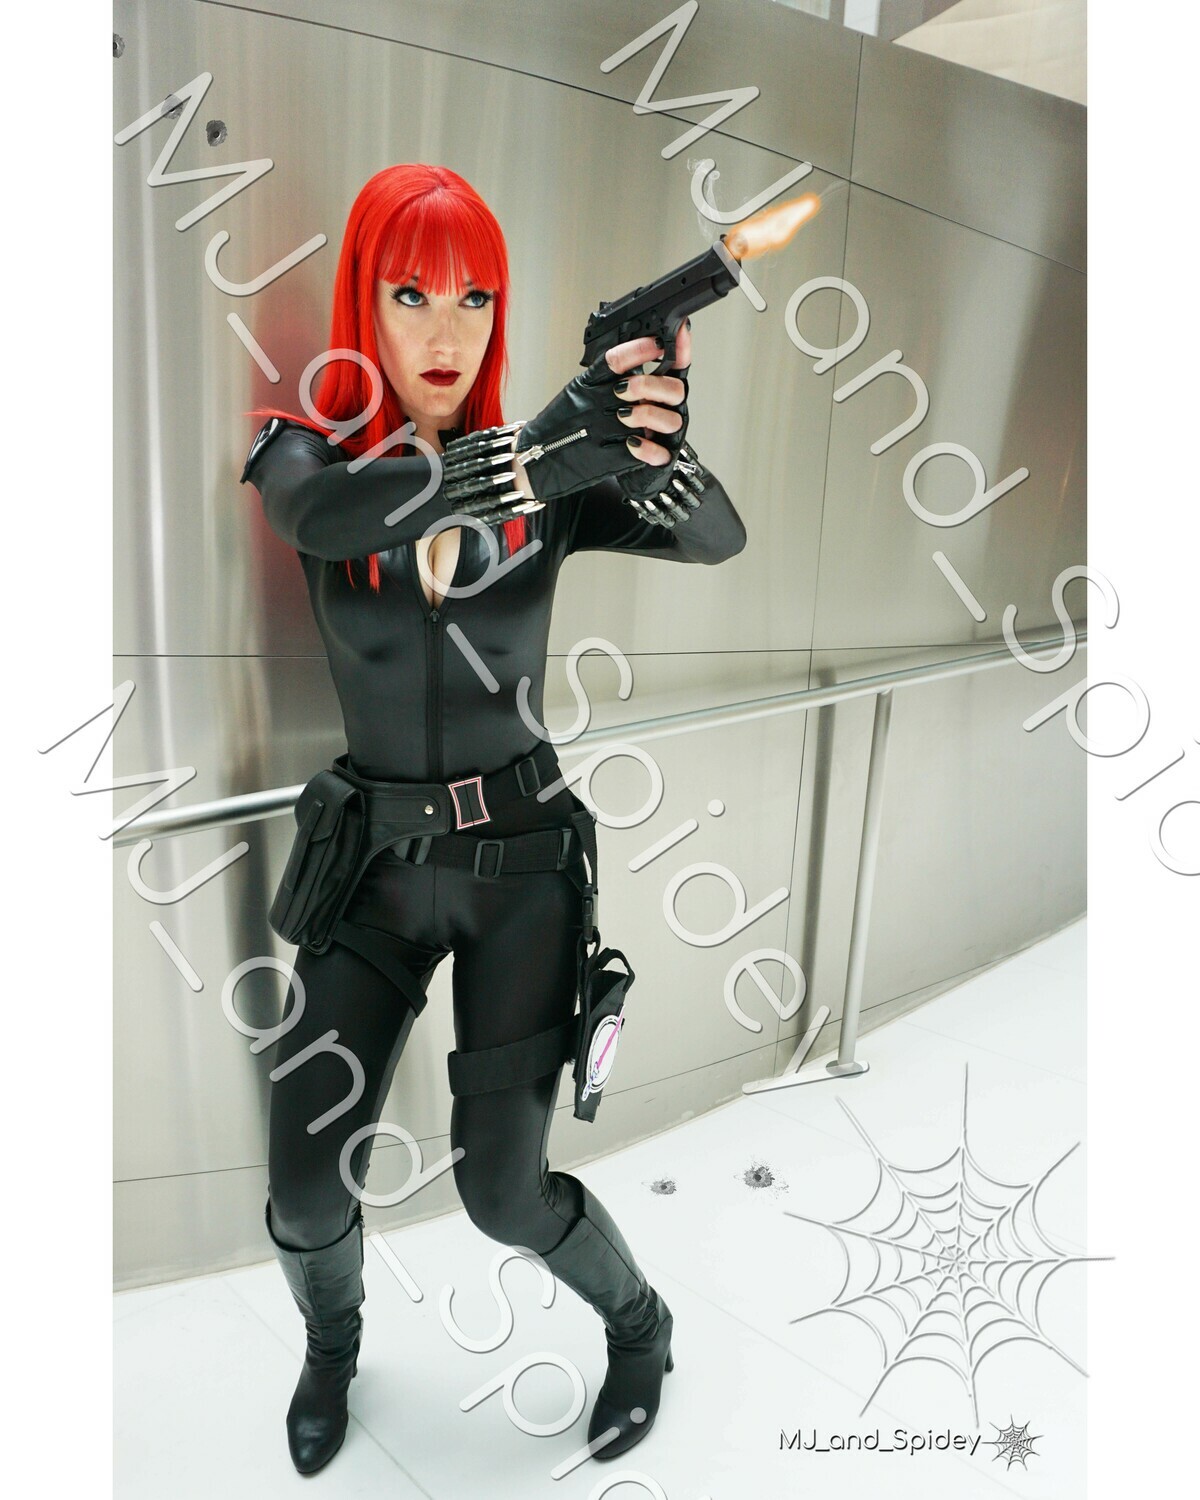 Marvel - Avengers - Black Widow 8A - Virgin Variant - Digital Cosplay Image (@MJ_and_Spidey, MJ and Spidey, Comics)